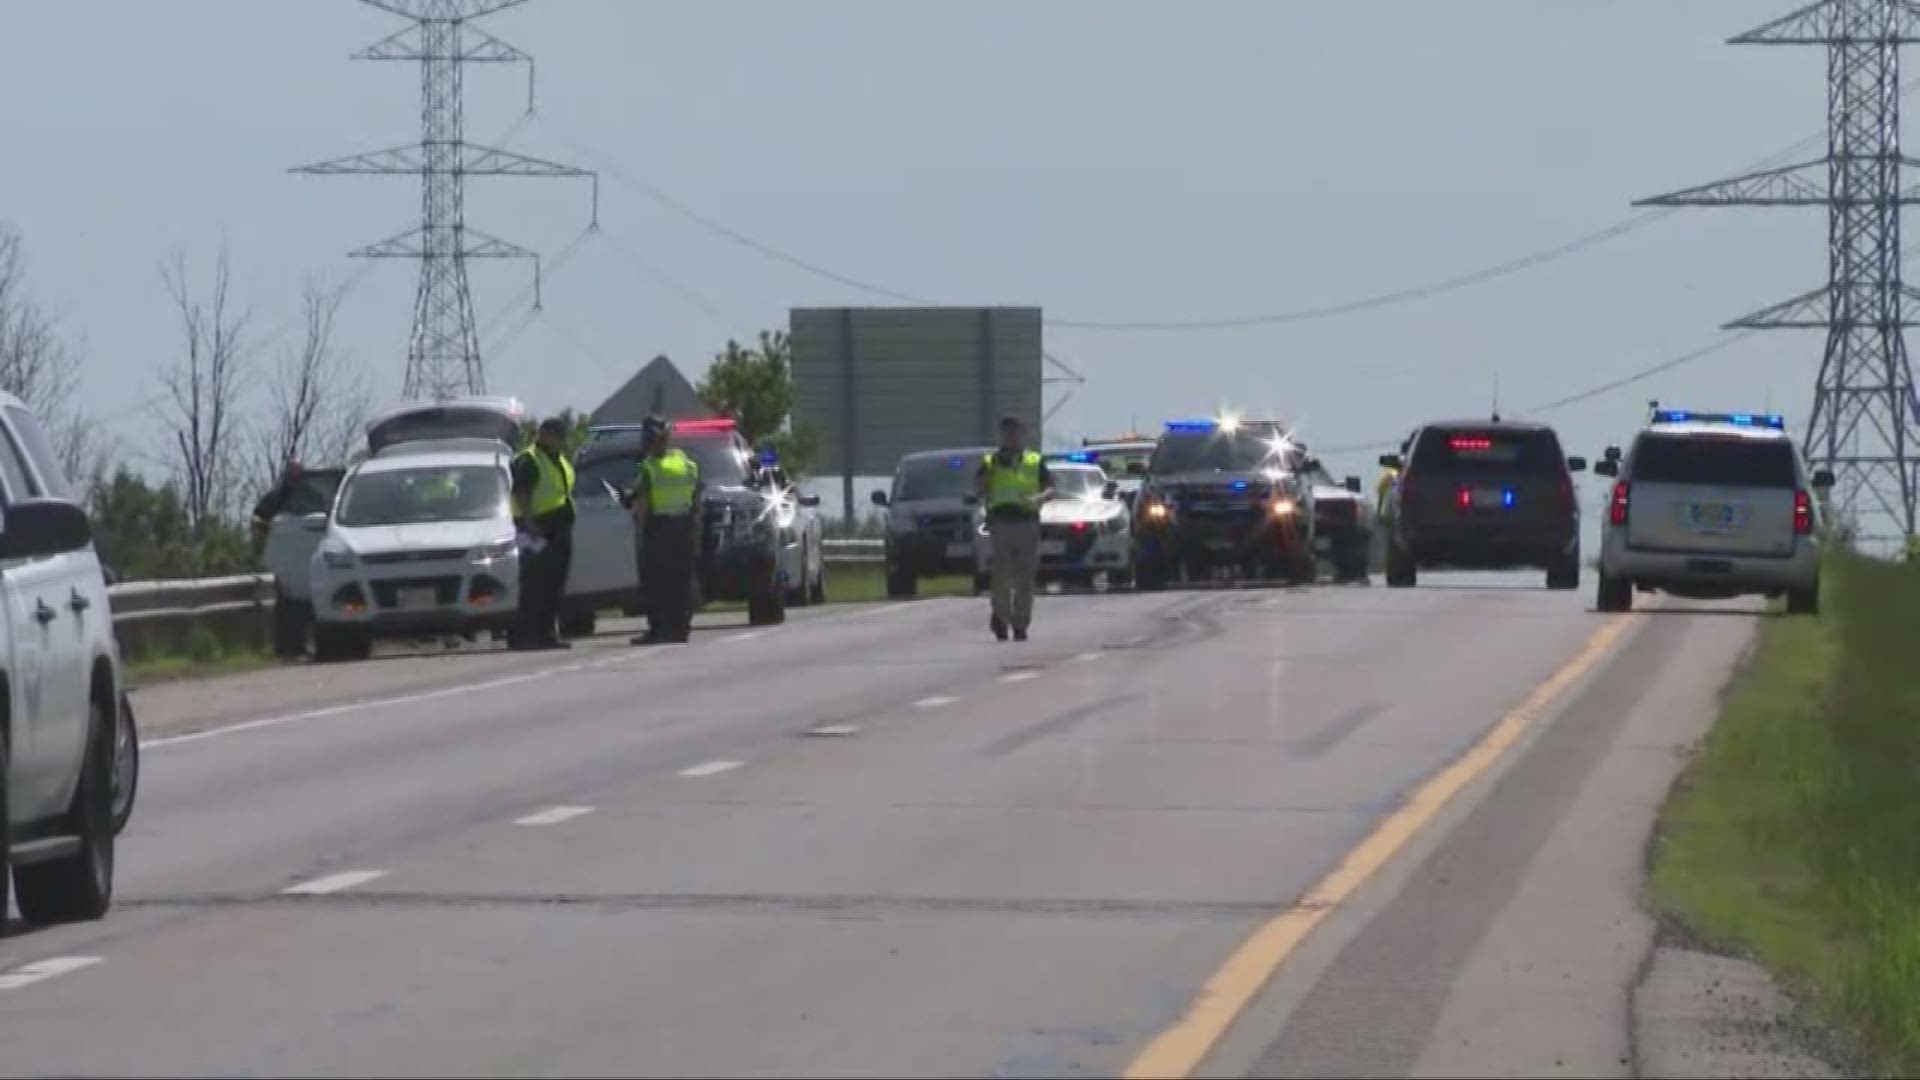 Man dies after being hit by semi truck on I-90 in Avon